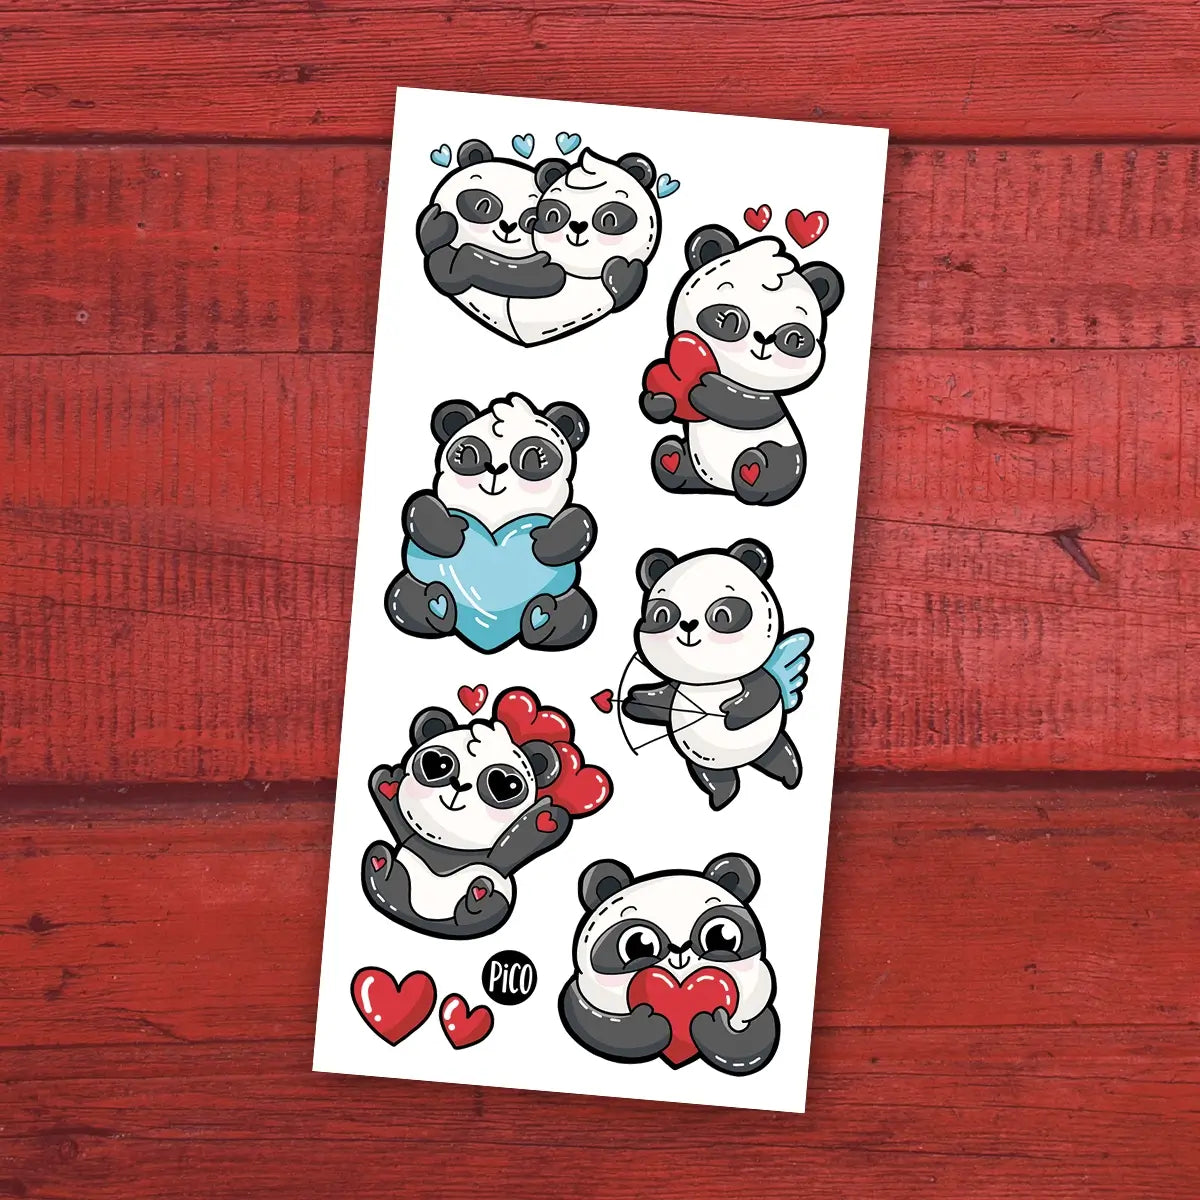 Temporary tattoos - The pandamoureux